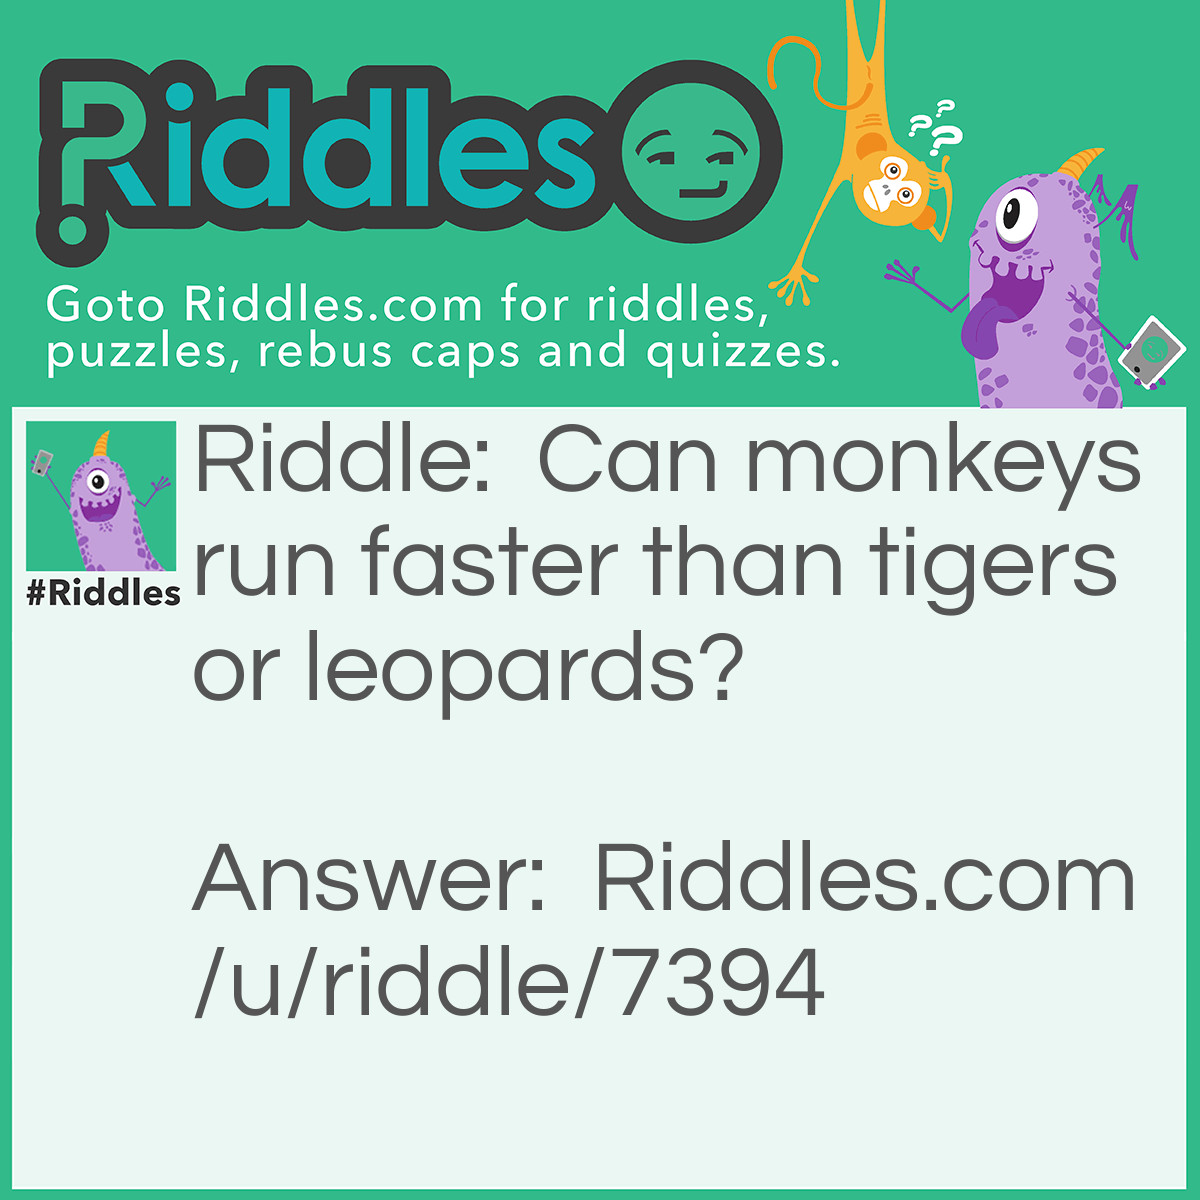 Riddle: Can monkeys run faster than tigers or leopards? Answer: Monkeys don't run, they hop and swing.